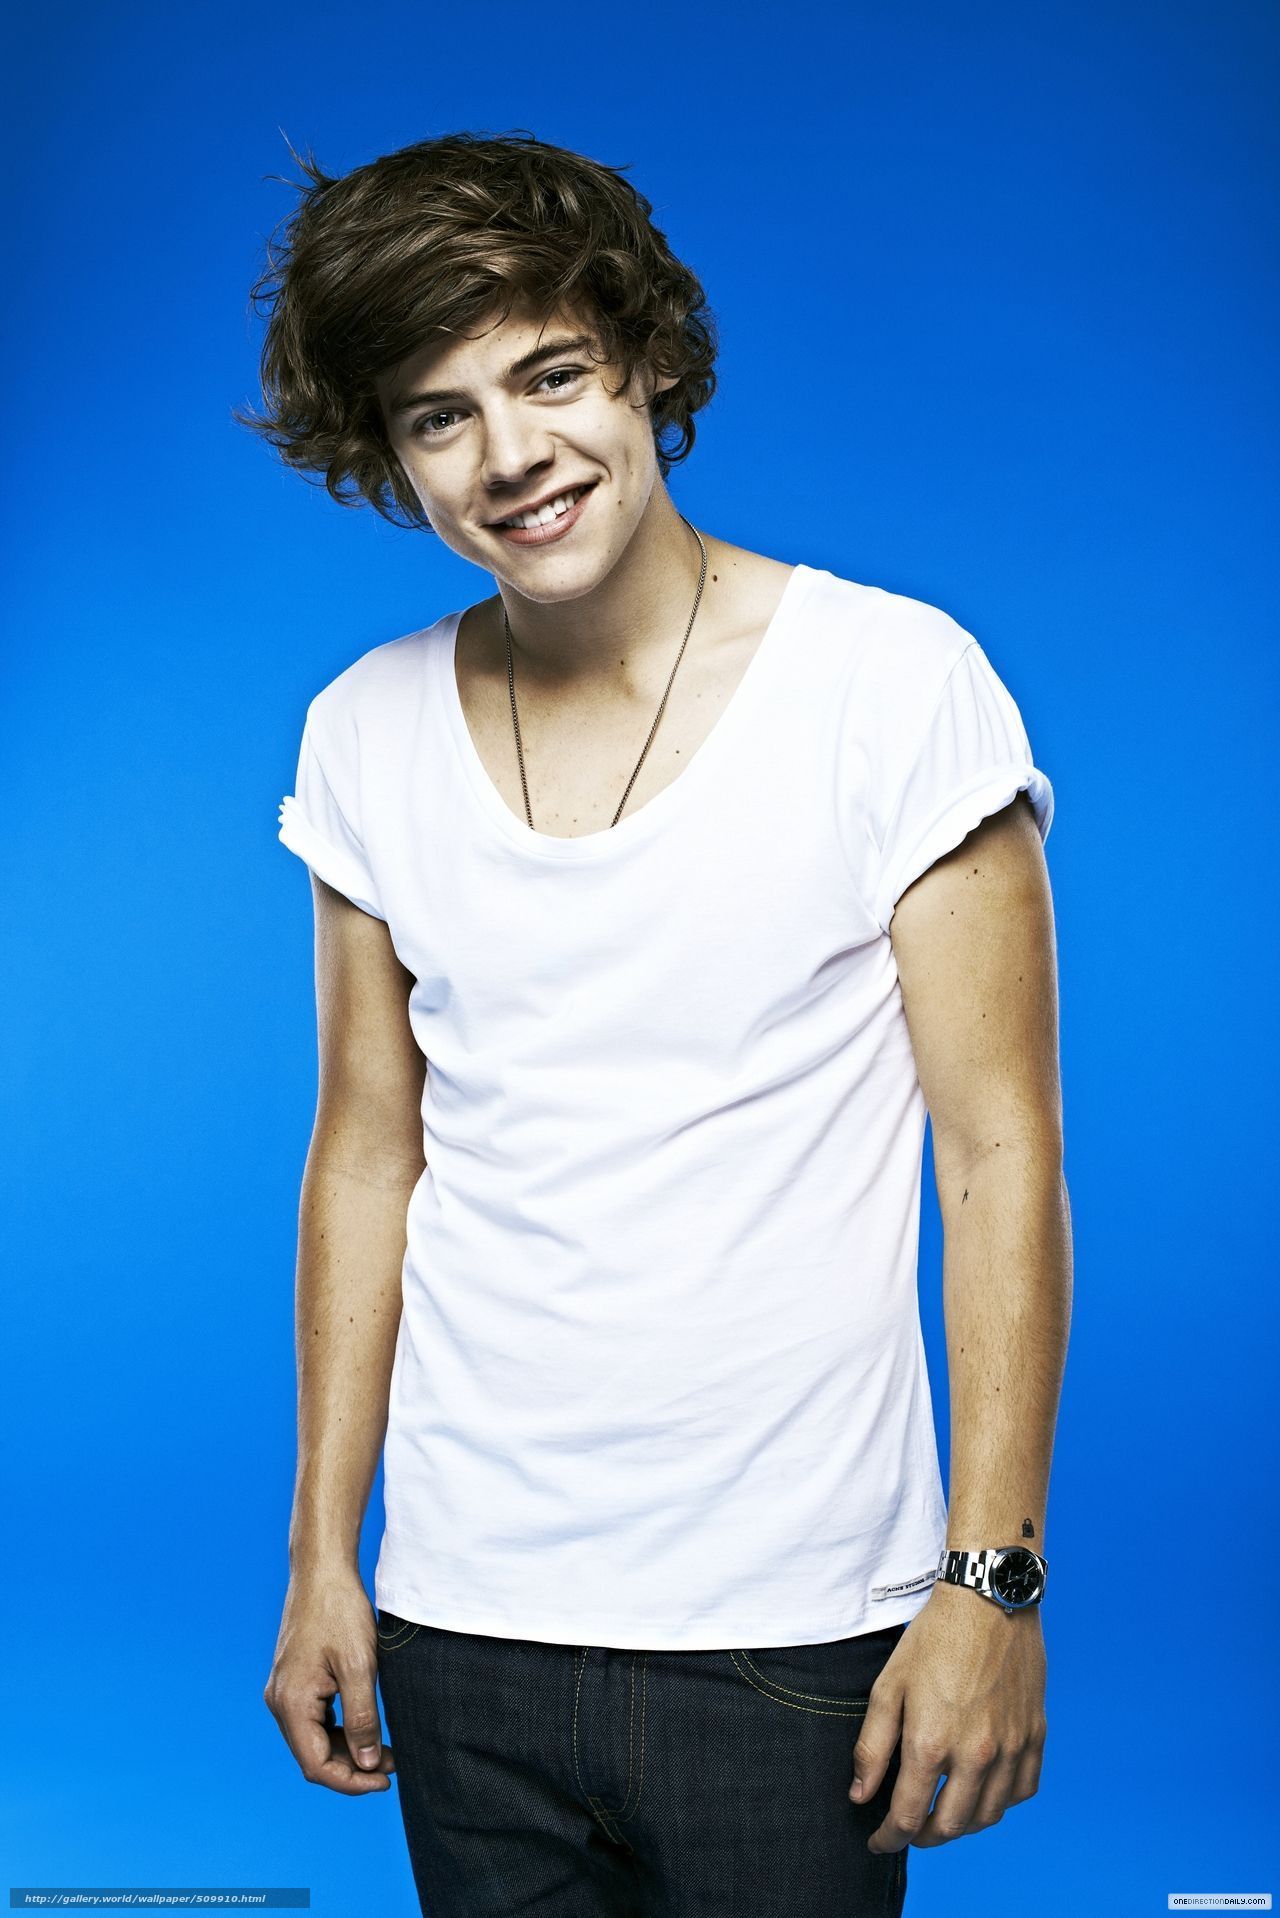 Download Wallpaper One Direction, Harry Styles, Harry - Harry Styles One Direction - HD Wallpaper 